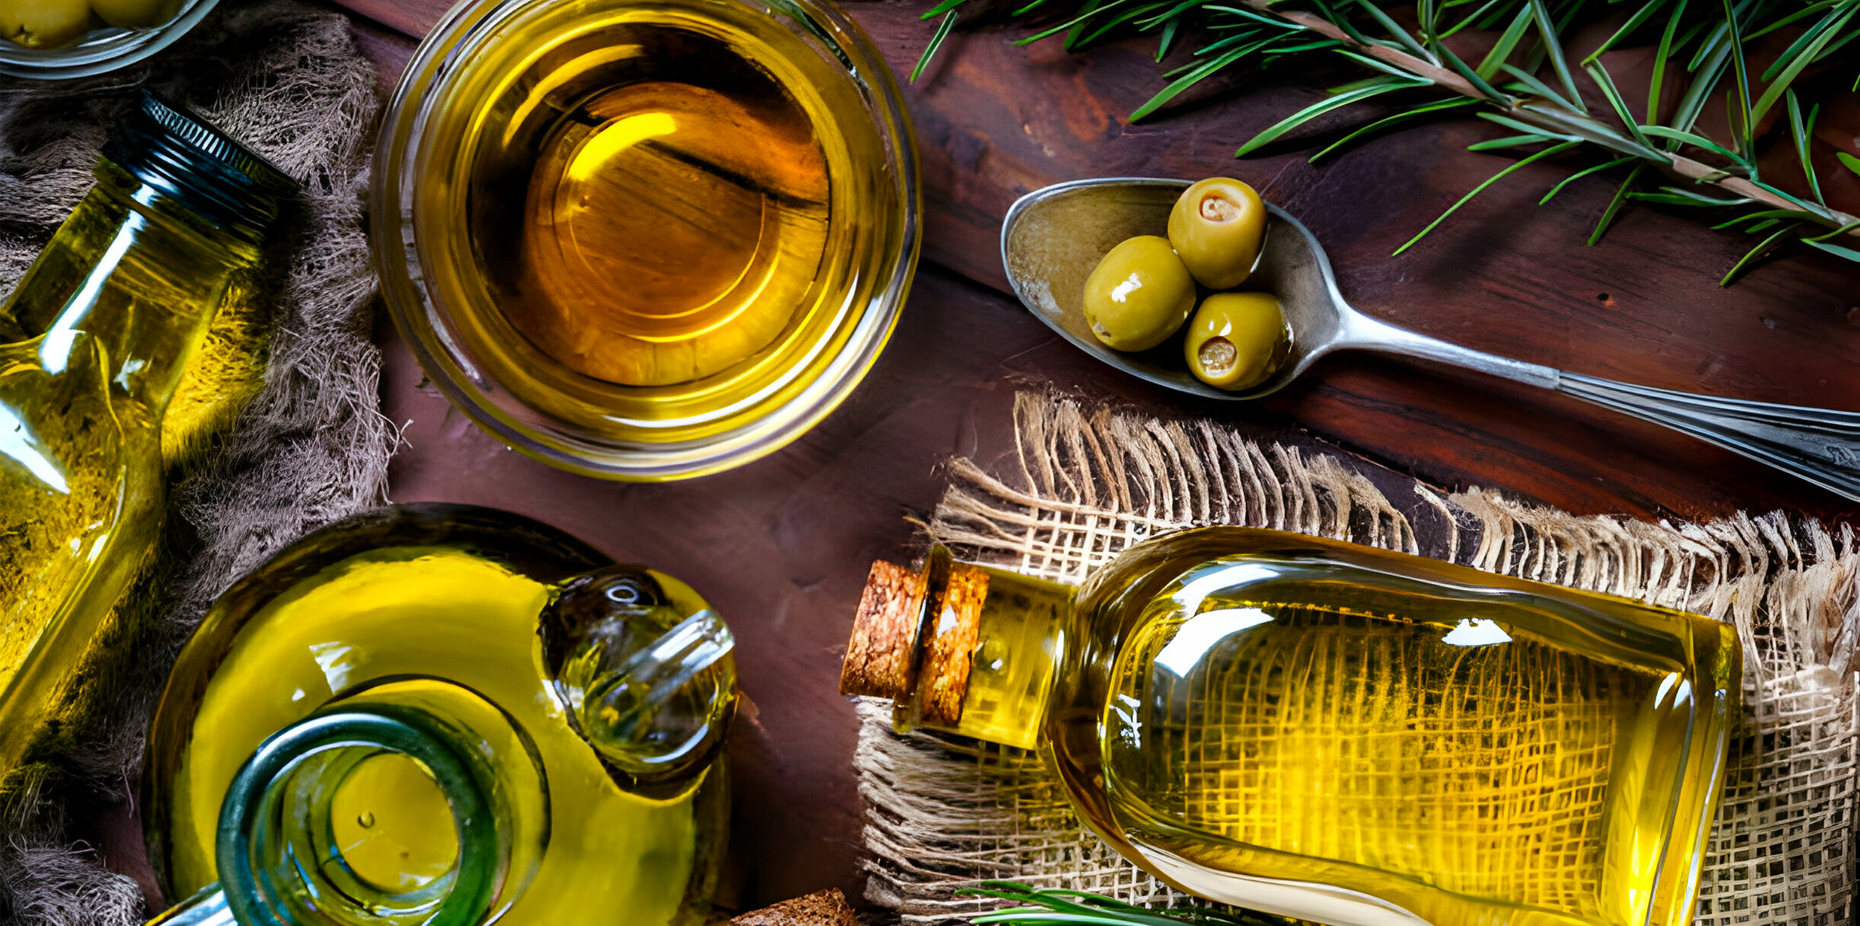 Olive Oil: Facts, Nutrition, Benefits, & More